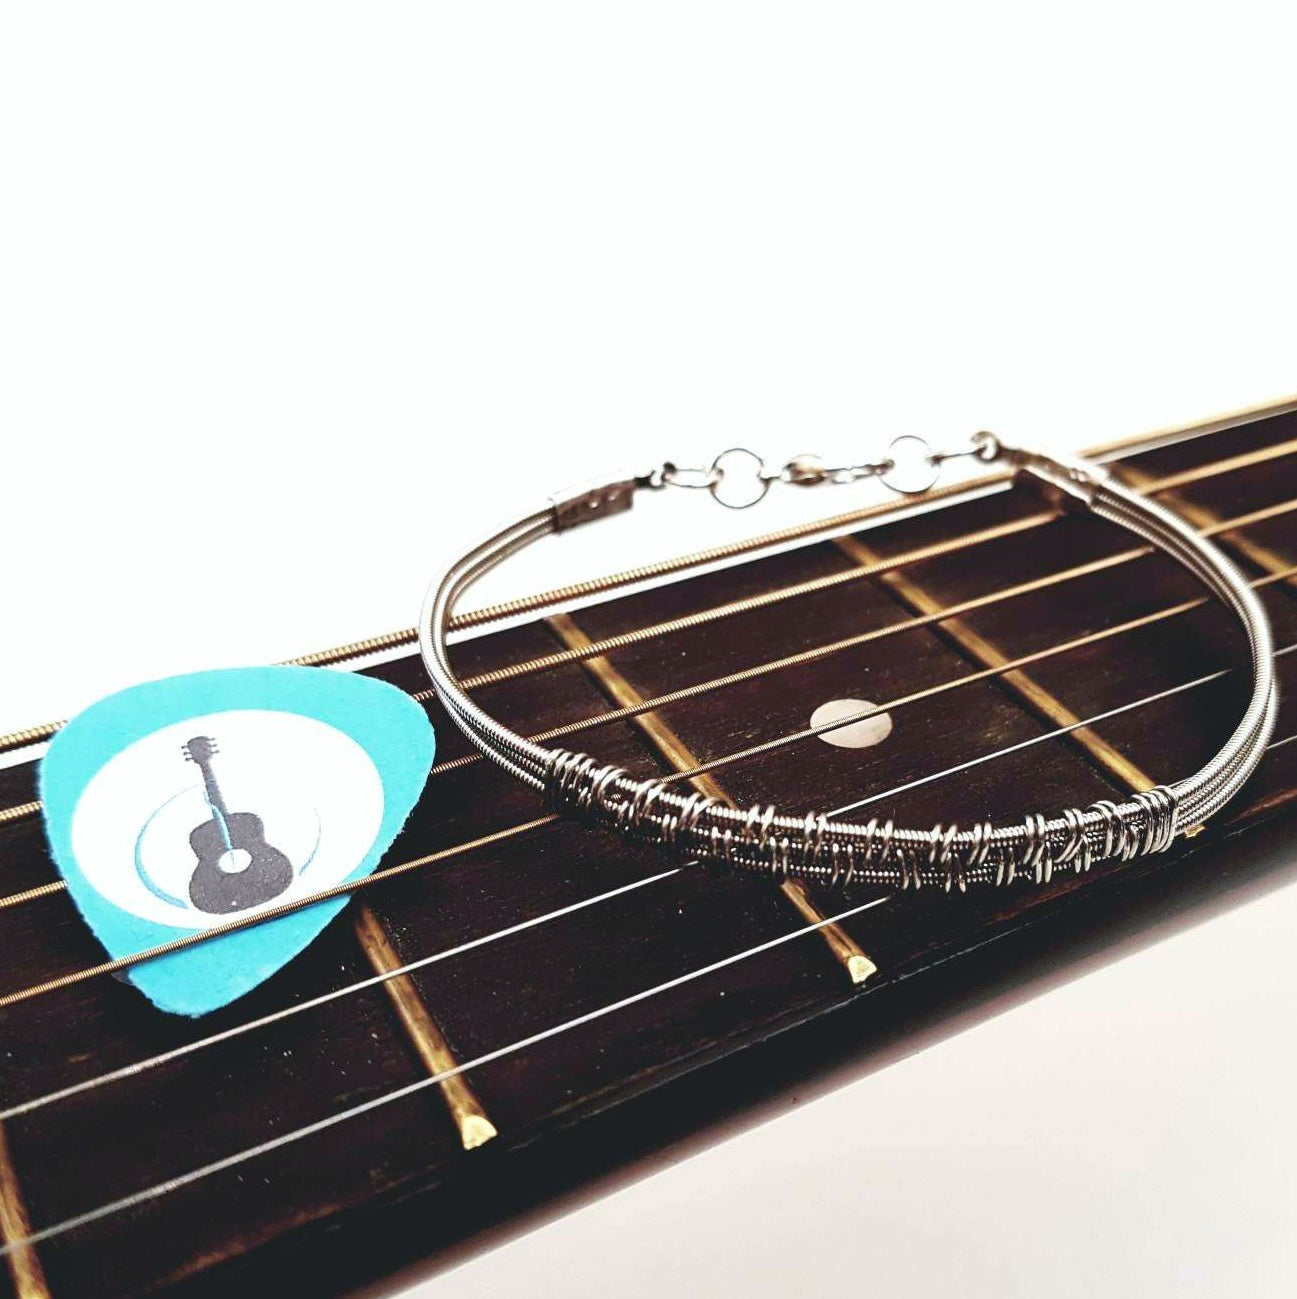 silver coloured clasp style bracelet made from 3 upcycled guitar strings - there is wire wrapped around the center of the bracelet - on the left is a blue guitar pick with an image of a black guitar- both are resting on the bridge of a guitar